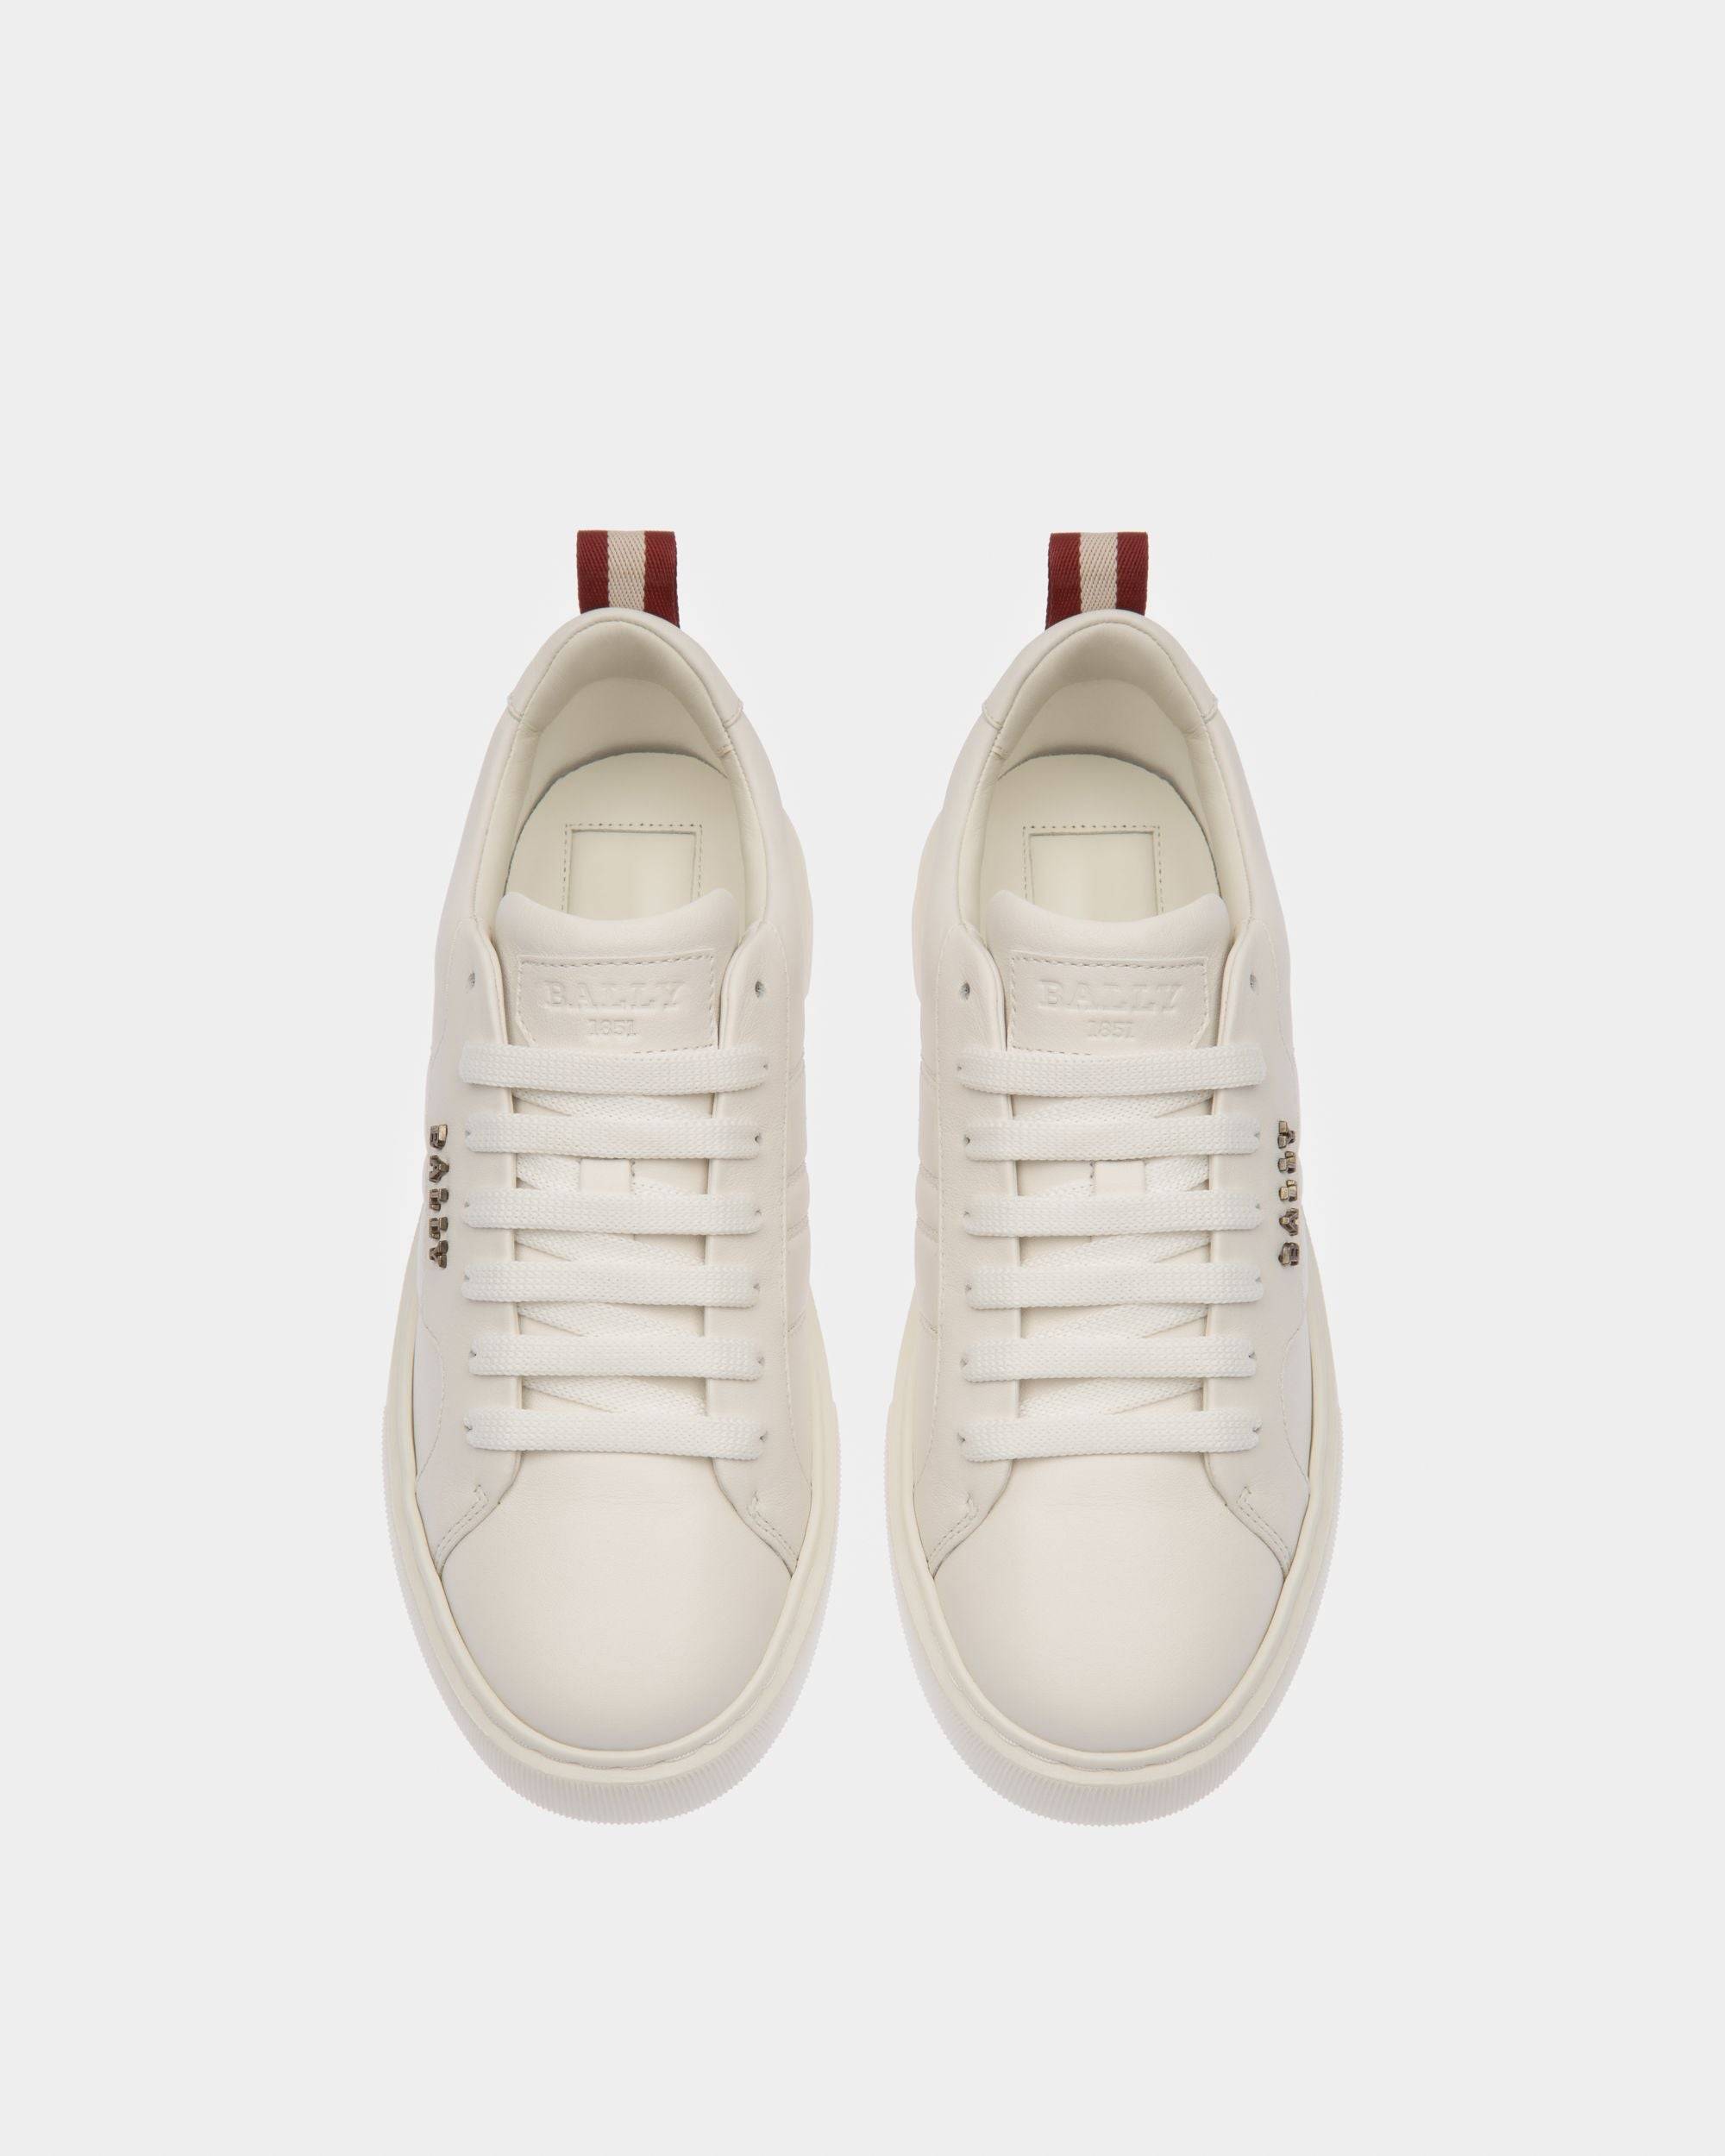 Maxim Leather Sneakers In White - Women's - Bally - 02